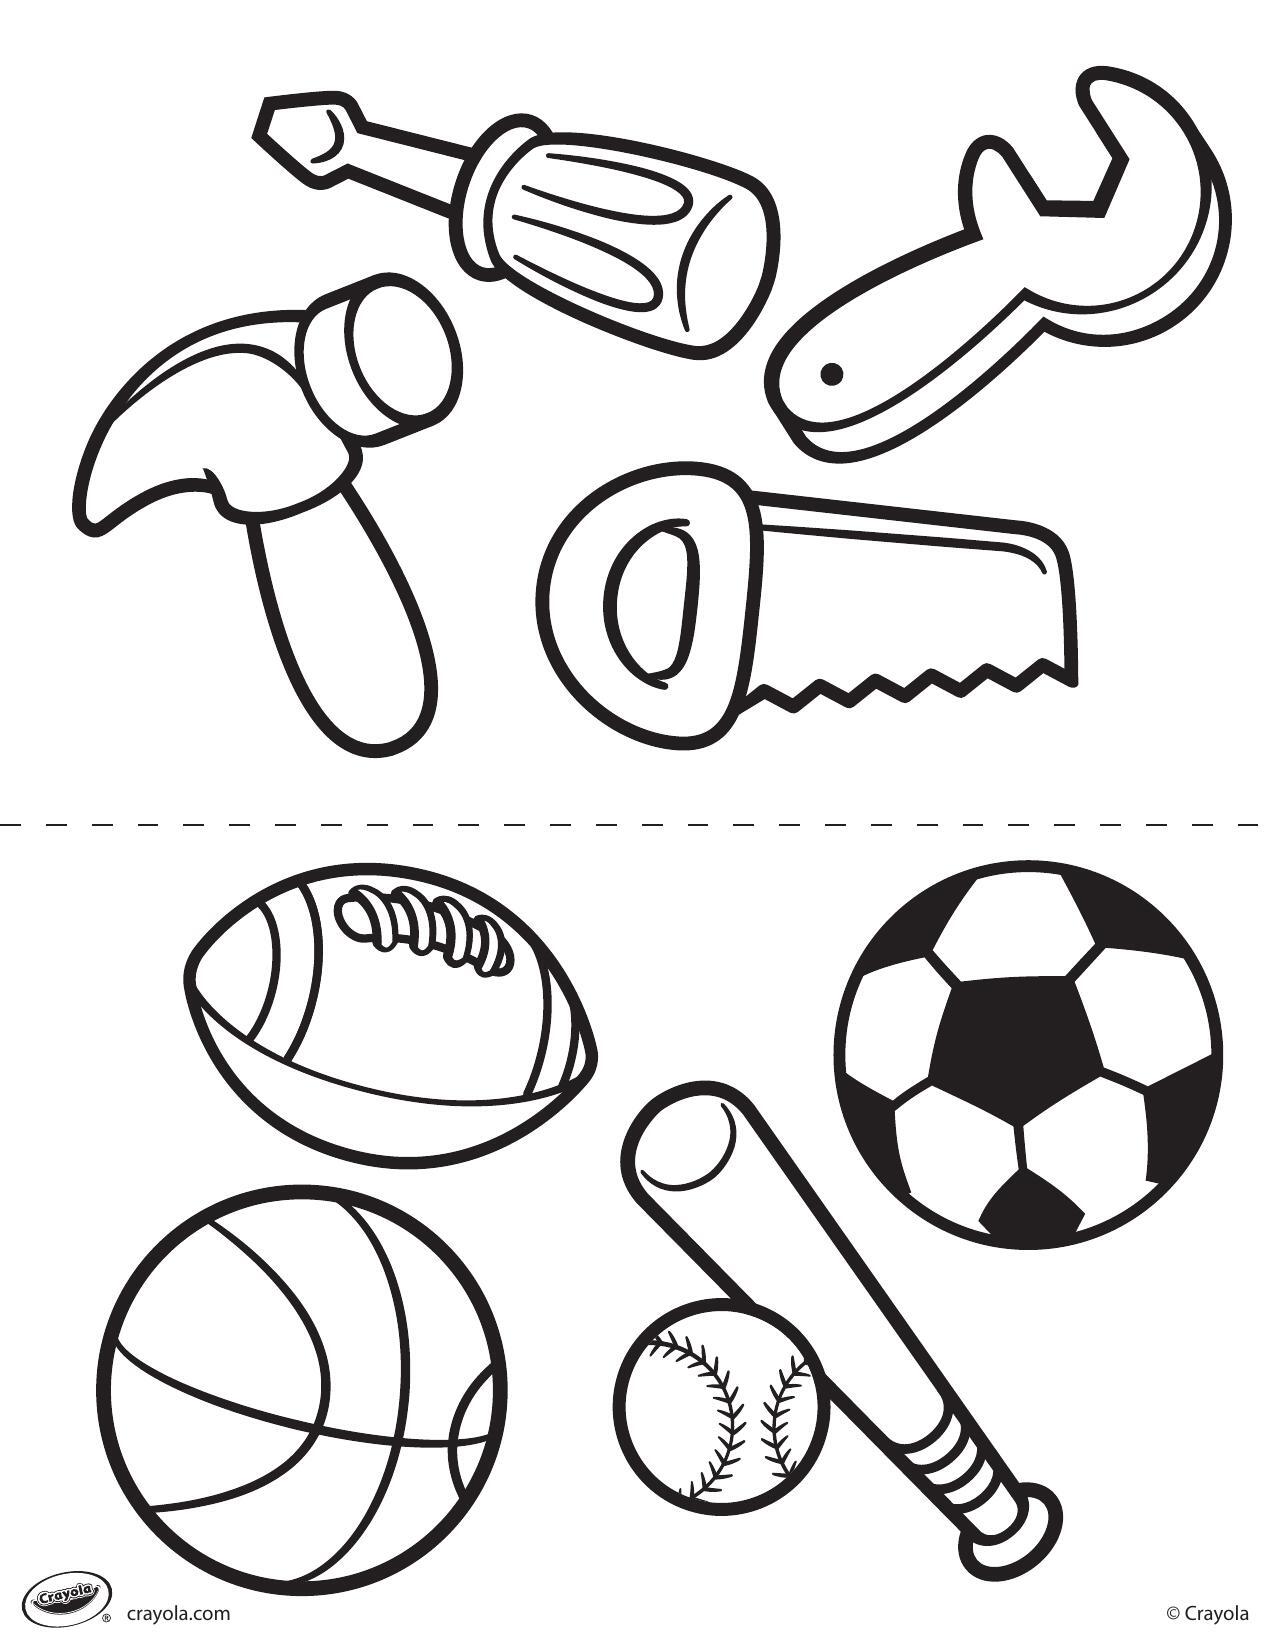 Tools and Sports Equipment